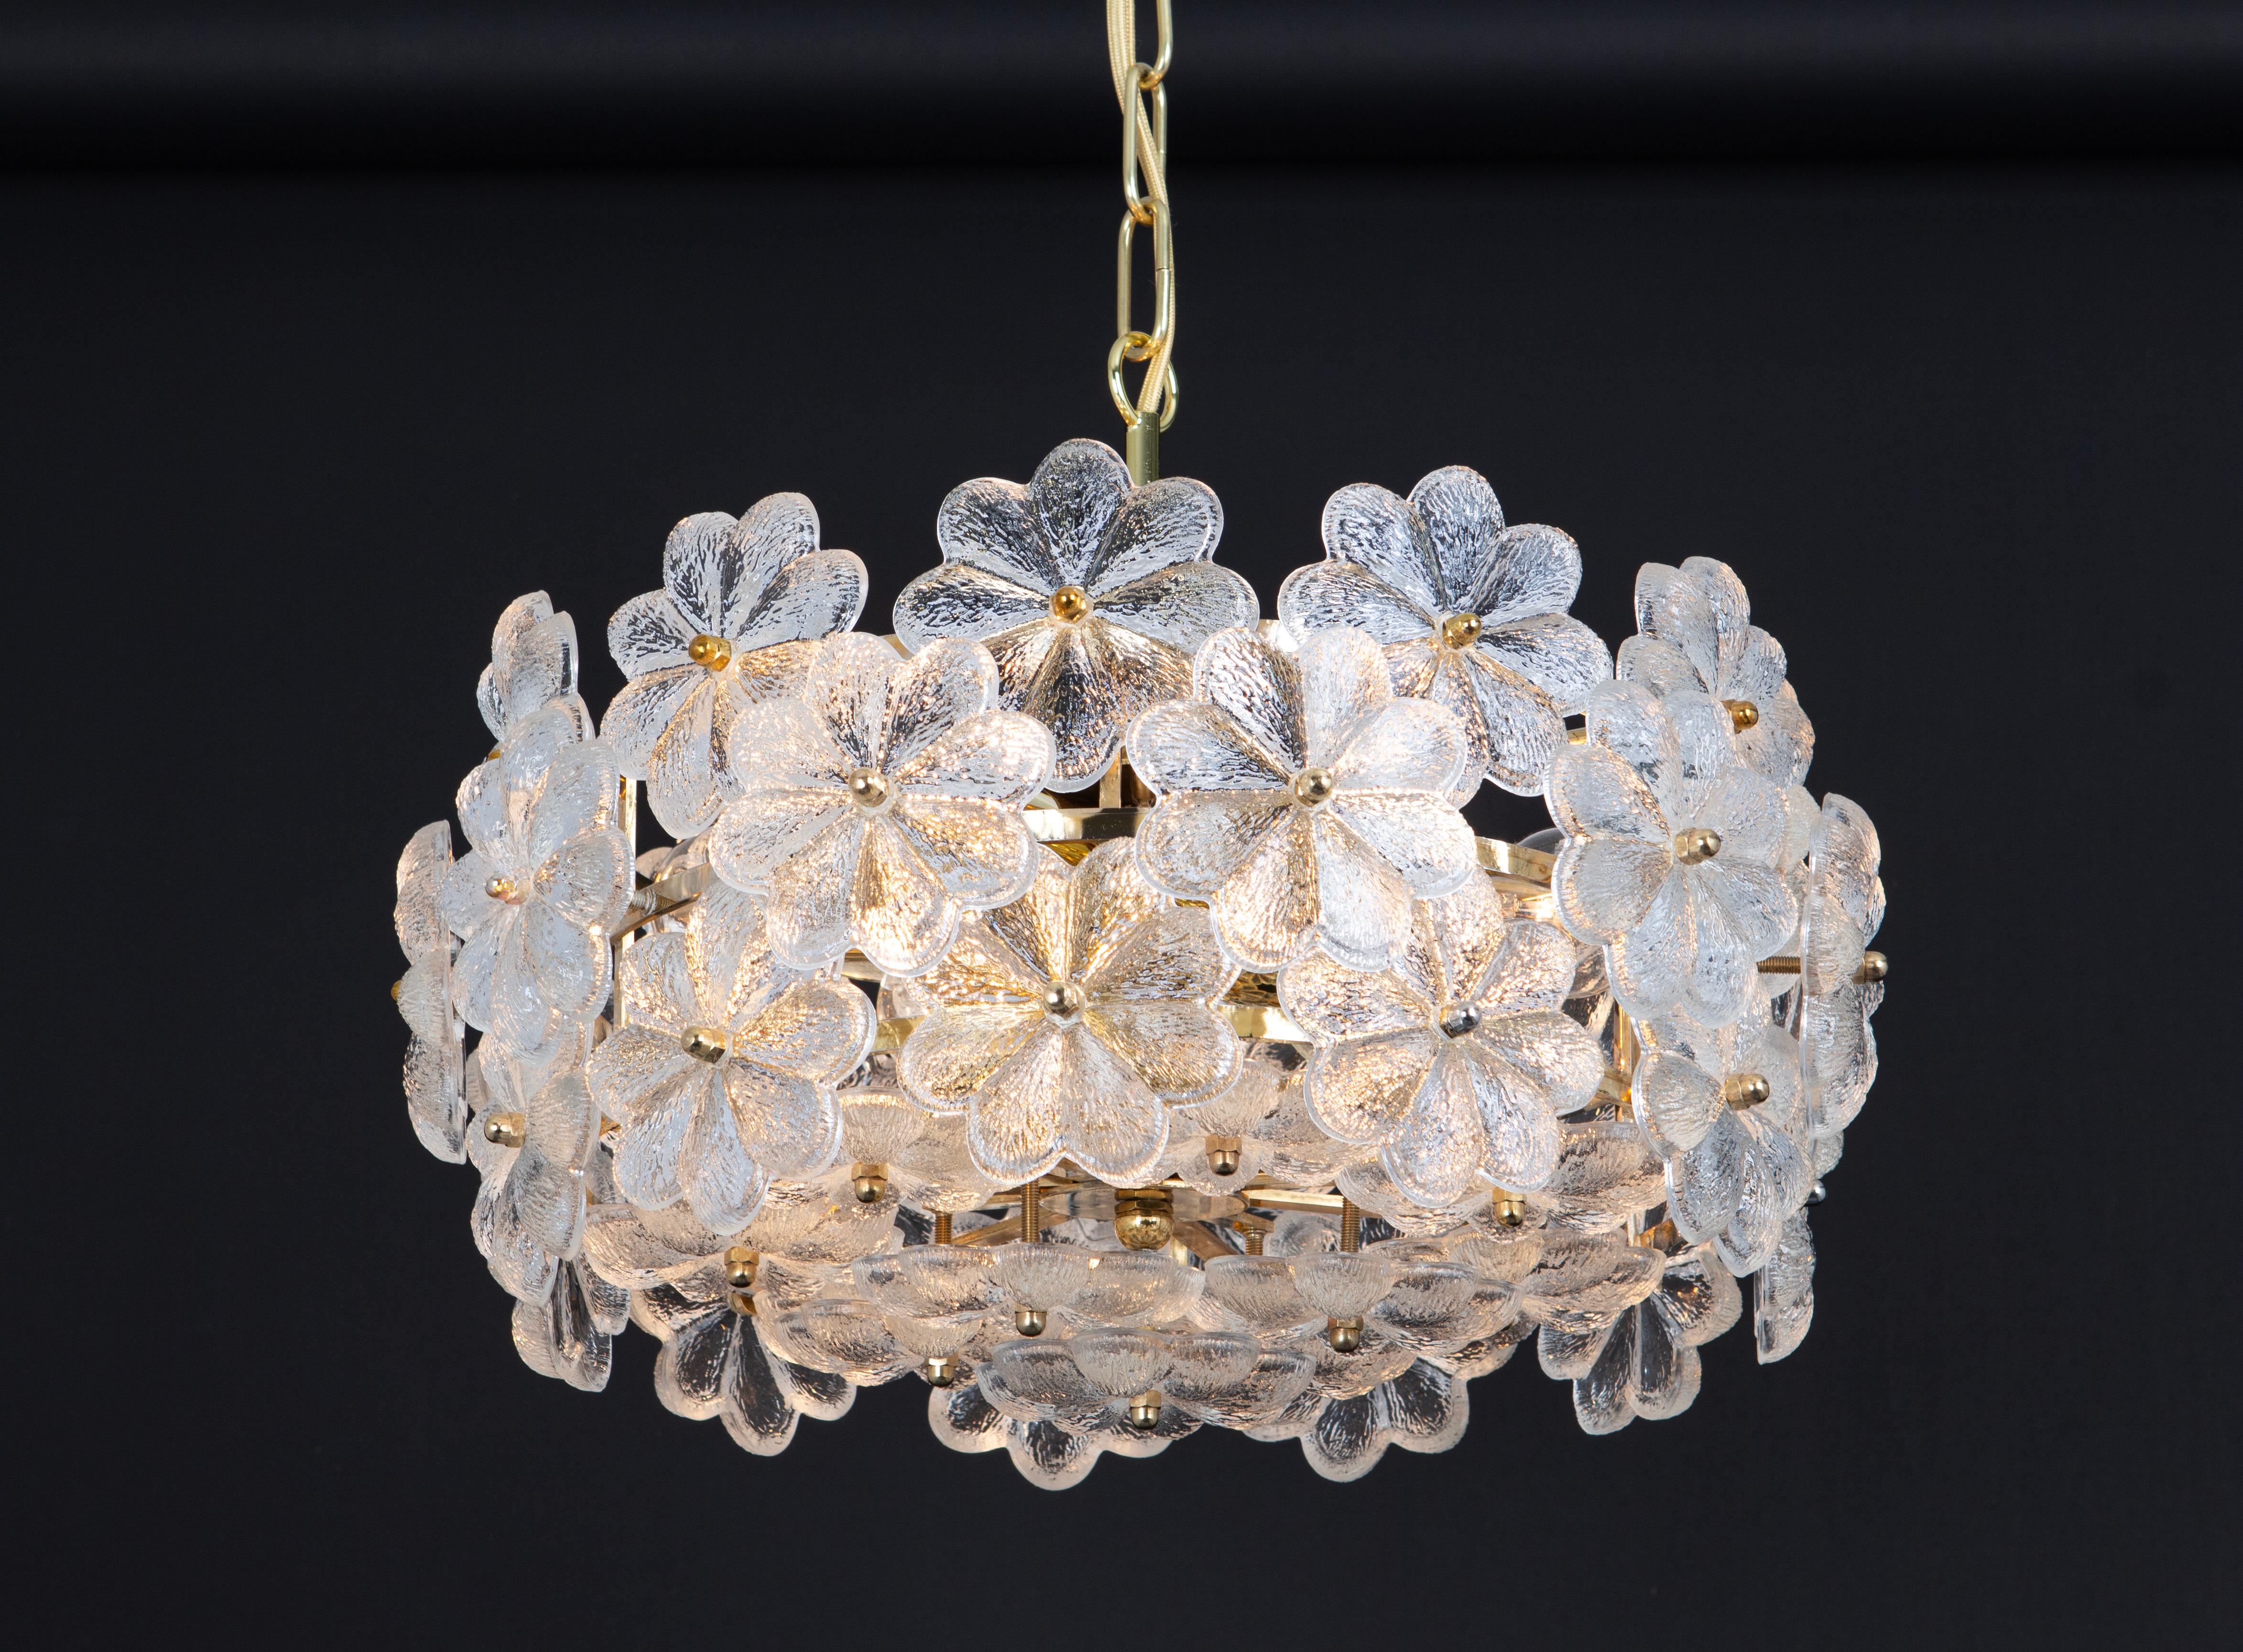 1 of 2 Stunning Petite Murano Glass Chandelier by Ernst Palme, Germany, 1970s For Sale 5